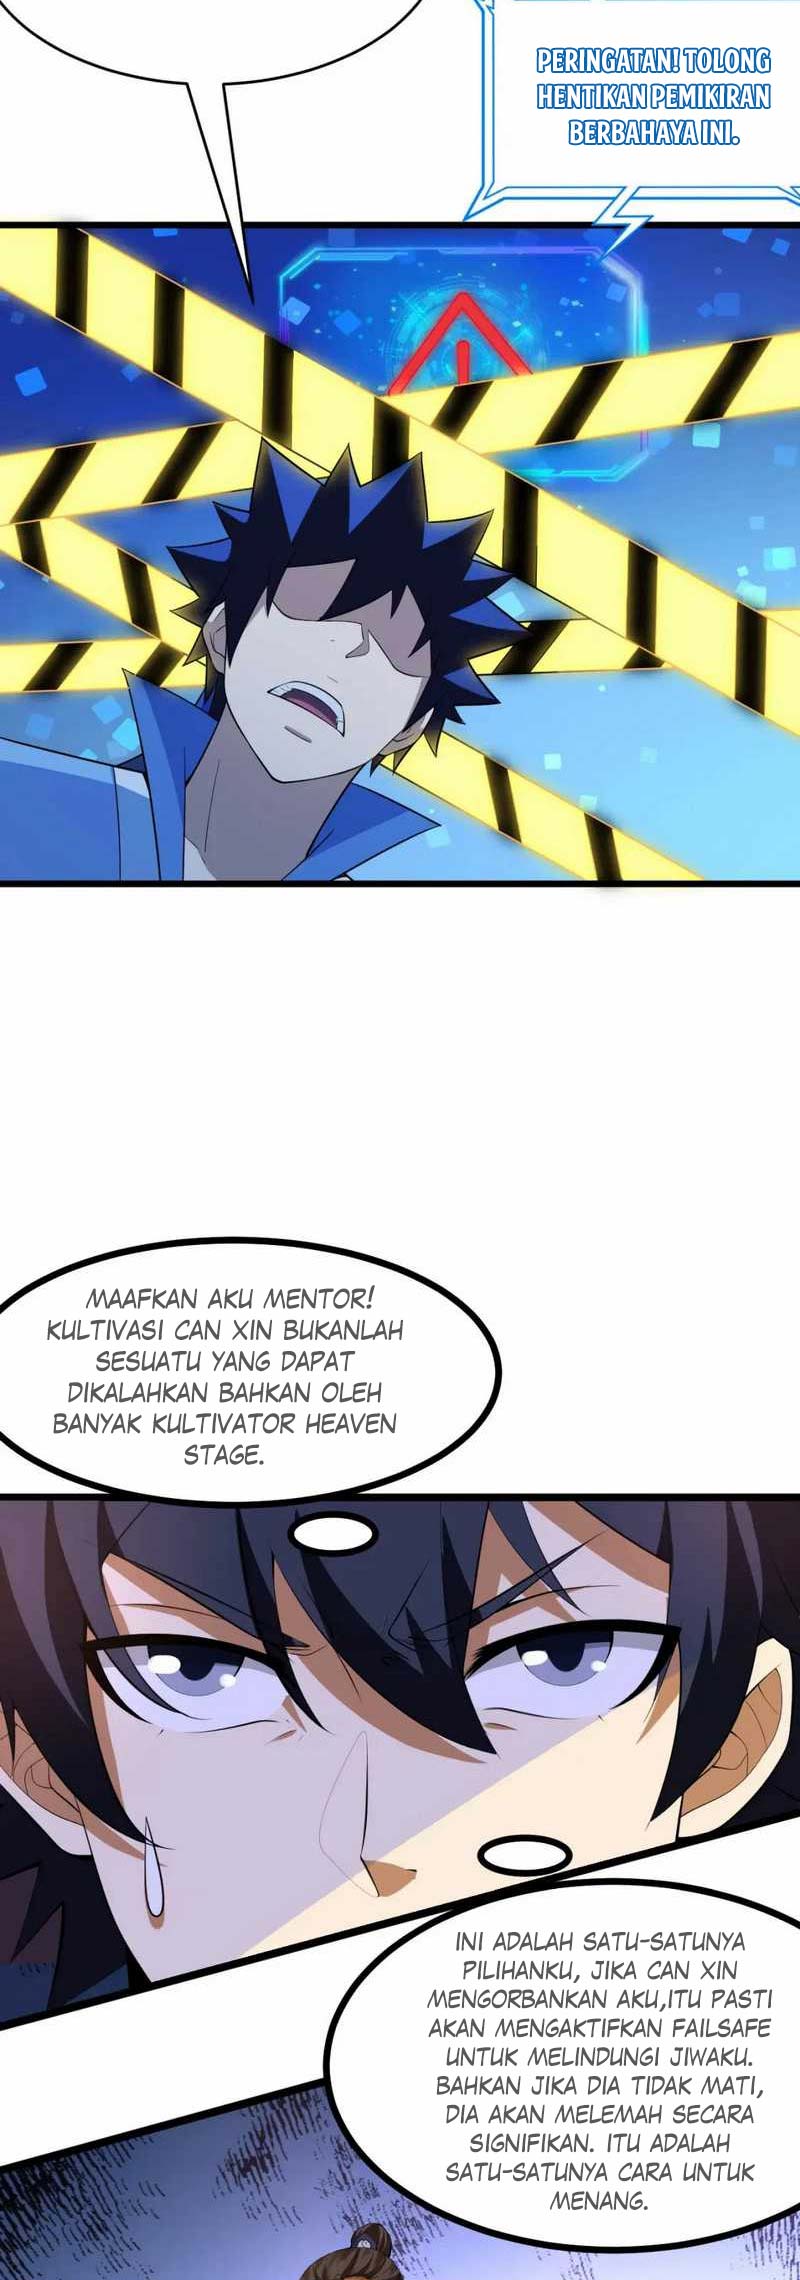 Dilarang COPAS - situs resmi www.mangacanblog.com - Komik i just want to be beaten to death by everyone 180 - chapter 180 181 Indonesia i just want to be beaten to death by everyone 180 - chapter 180 Terbaru 20|Baca Manga Komik Indonesia|Mangacan